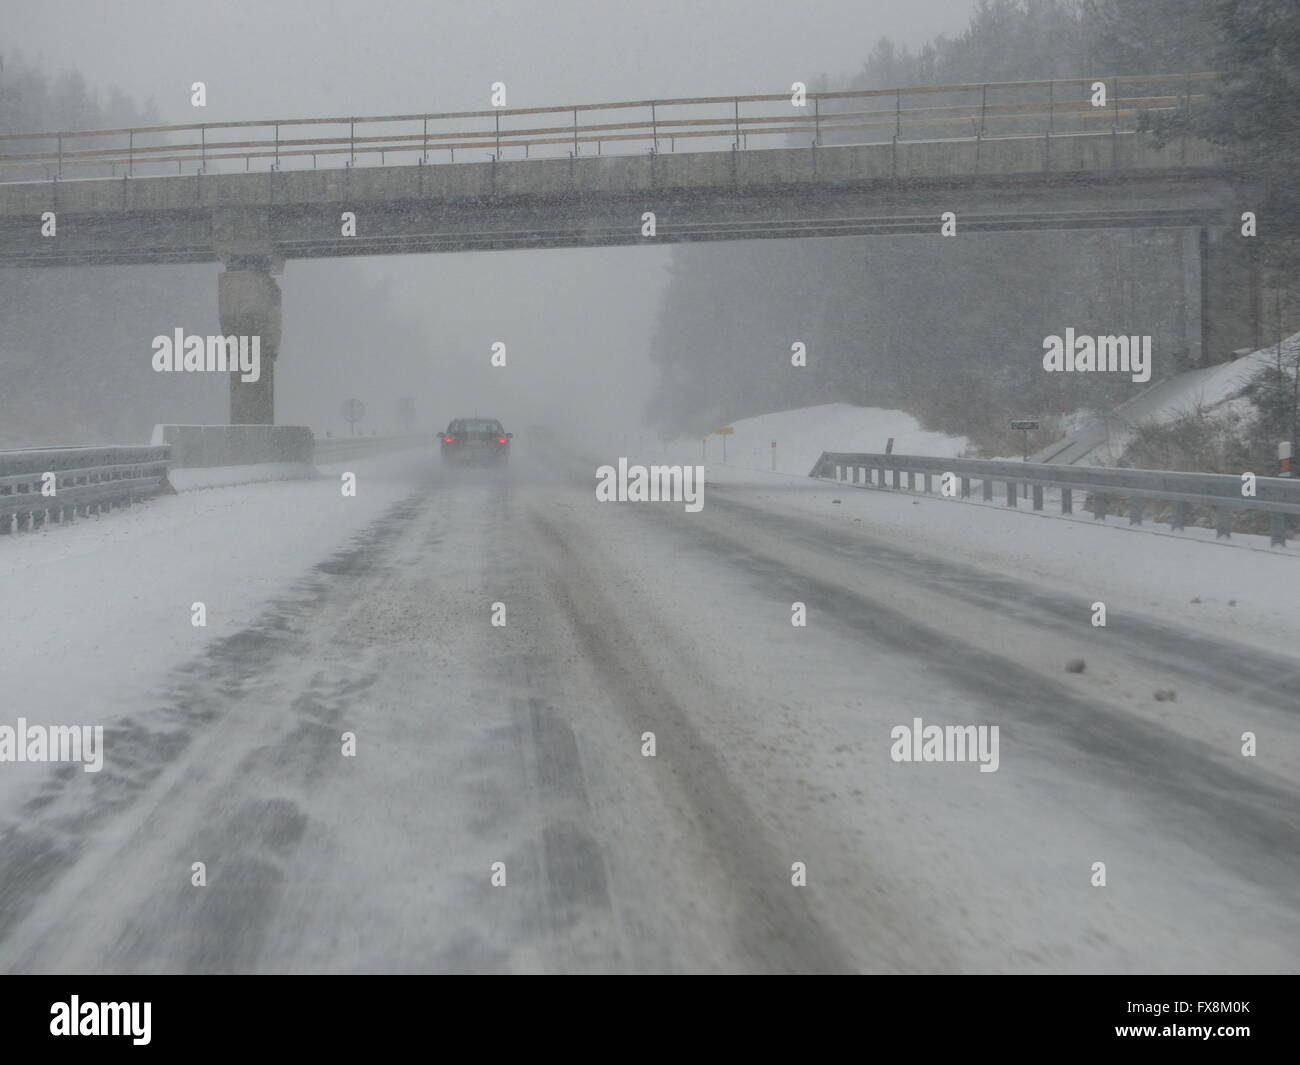 Highway in winter, slippery, dangerous driving conditions Stock Photo